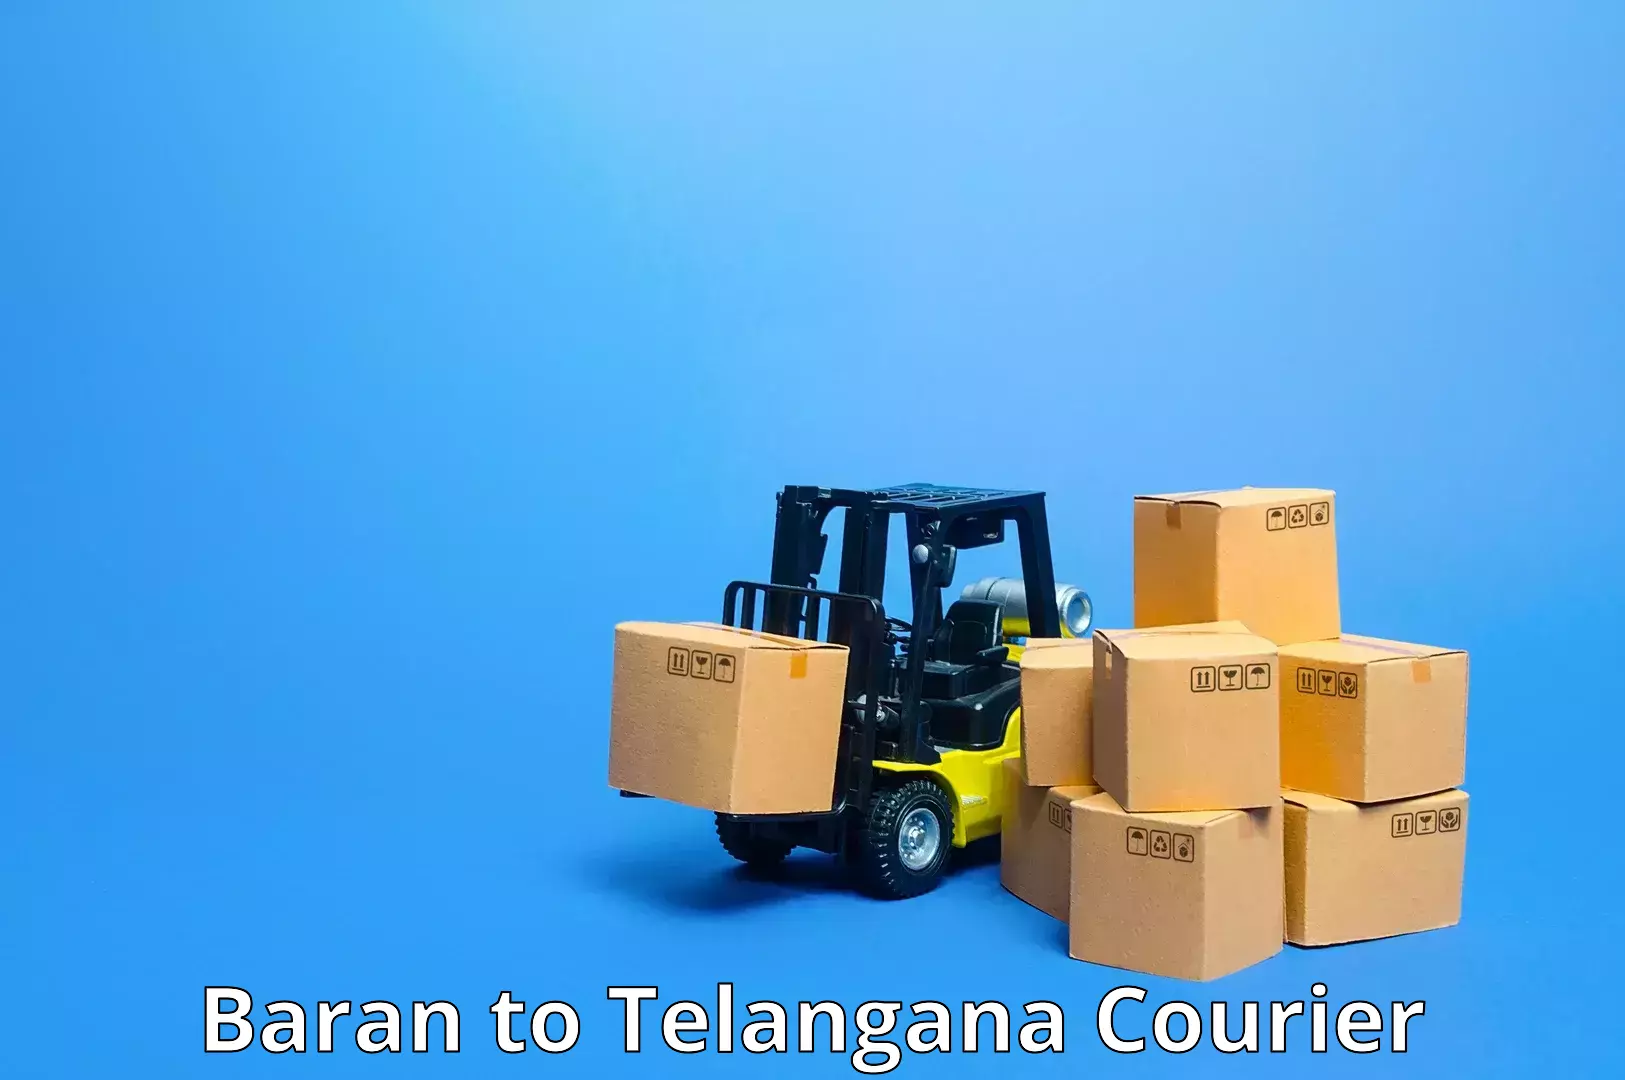 Cash on delivery service Baran to Manneguda